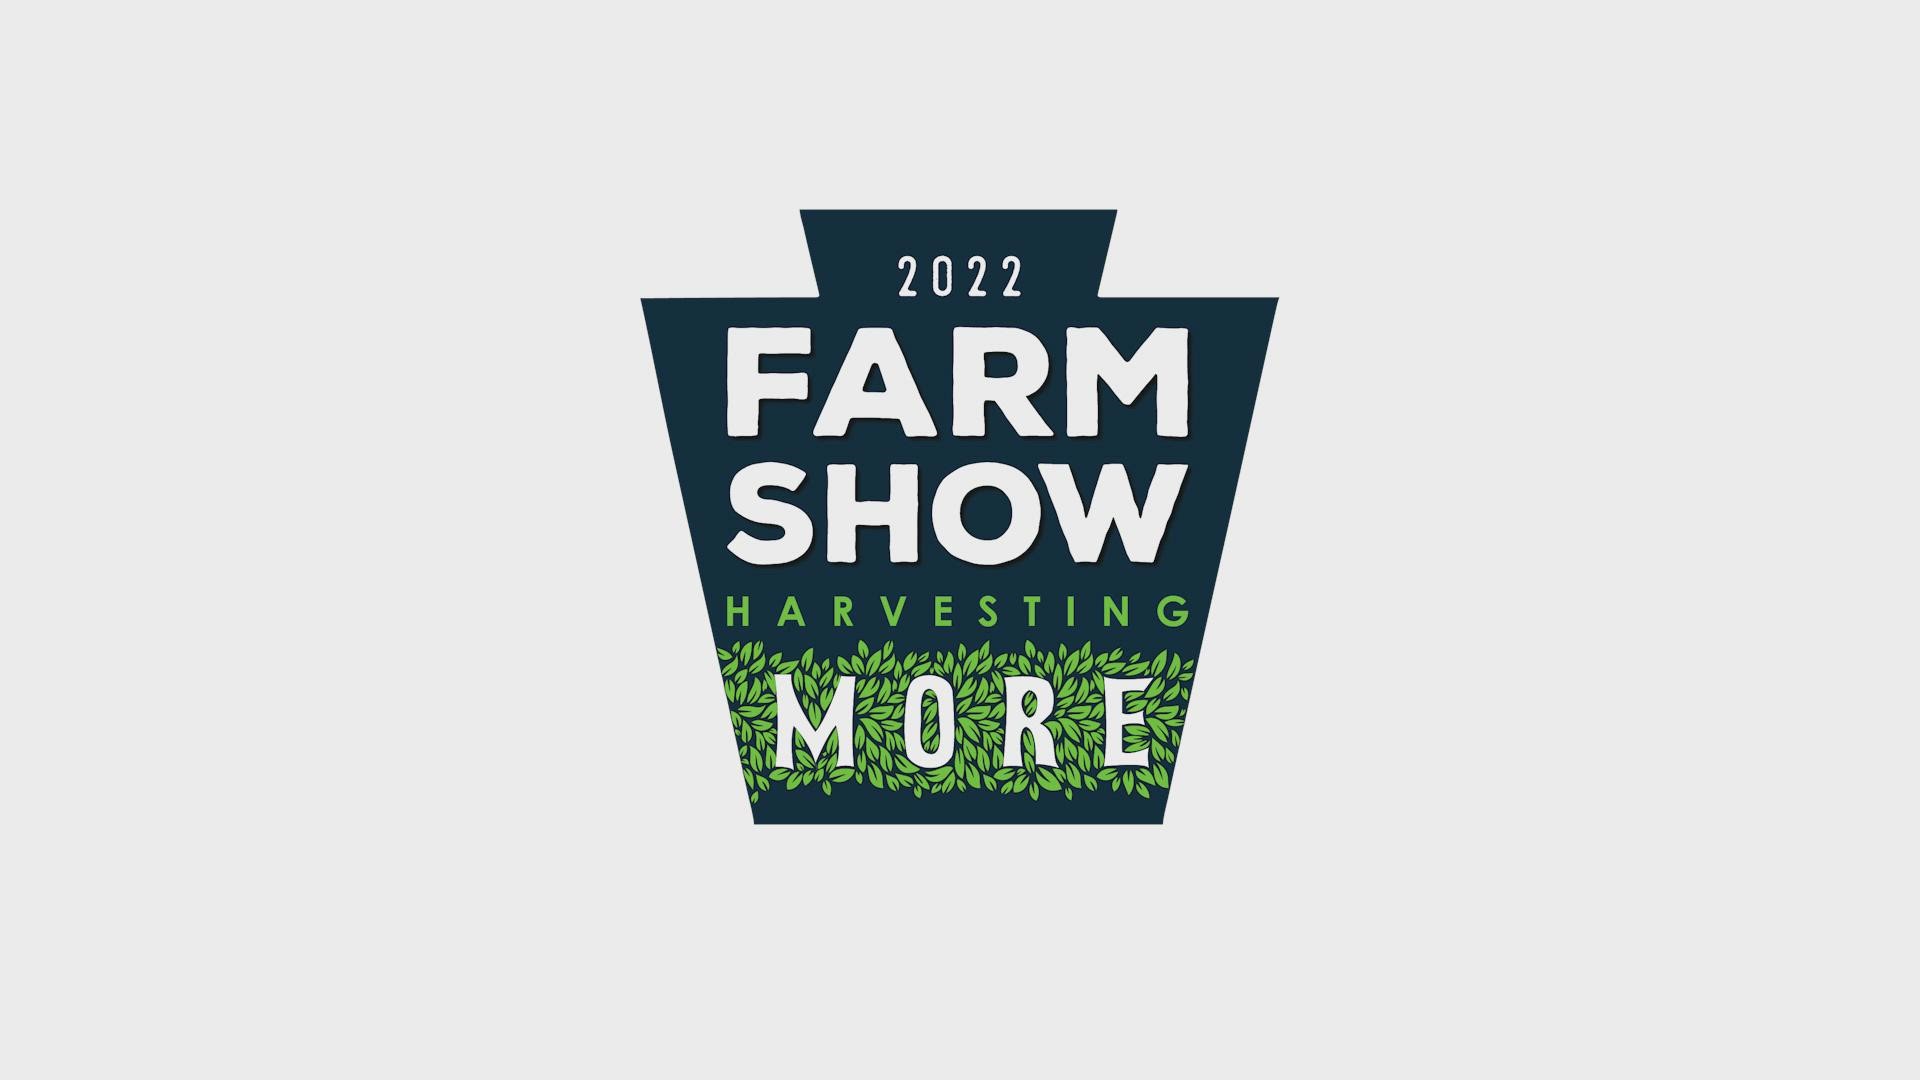 The PA Farm Show provided this time-lapse video of the two week construction of the 2022 butter sculpture.